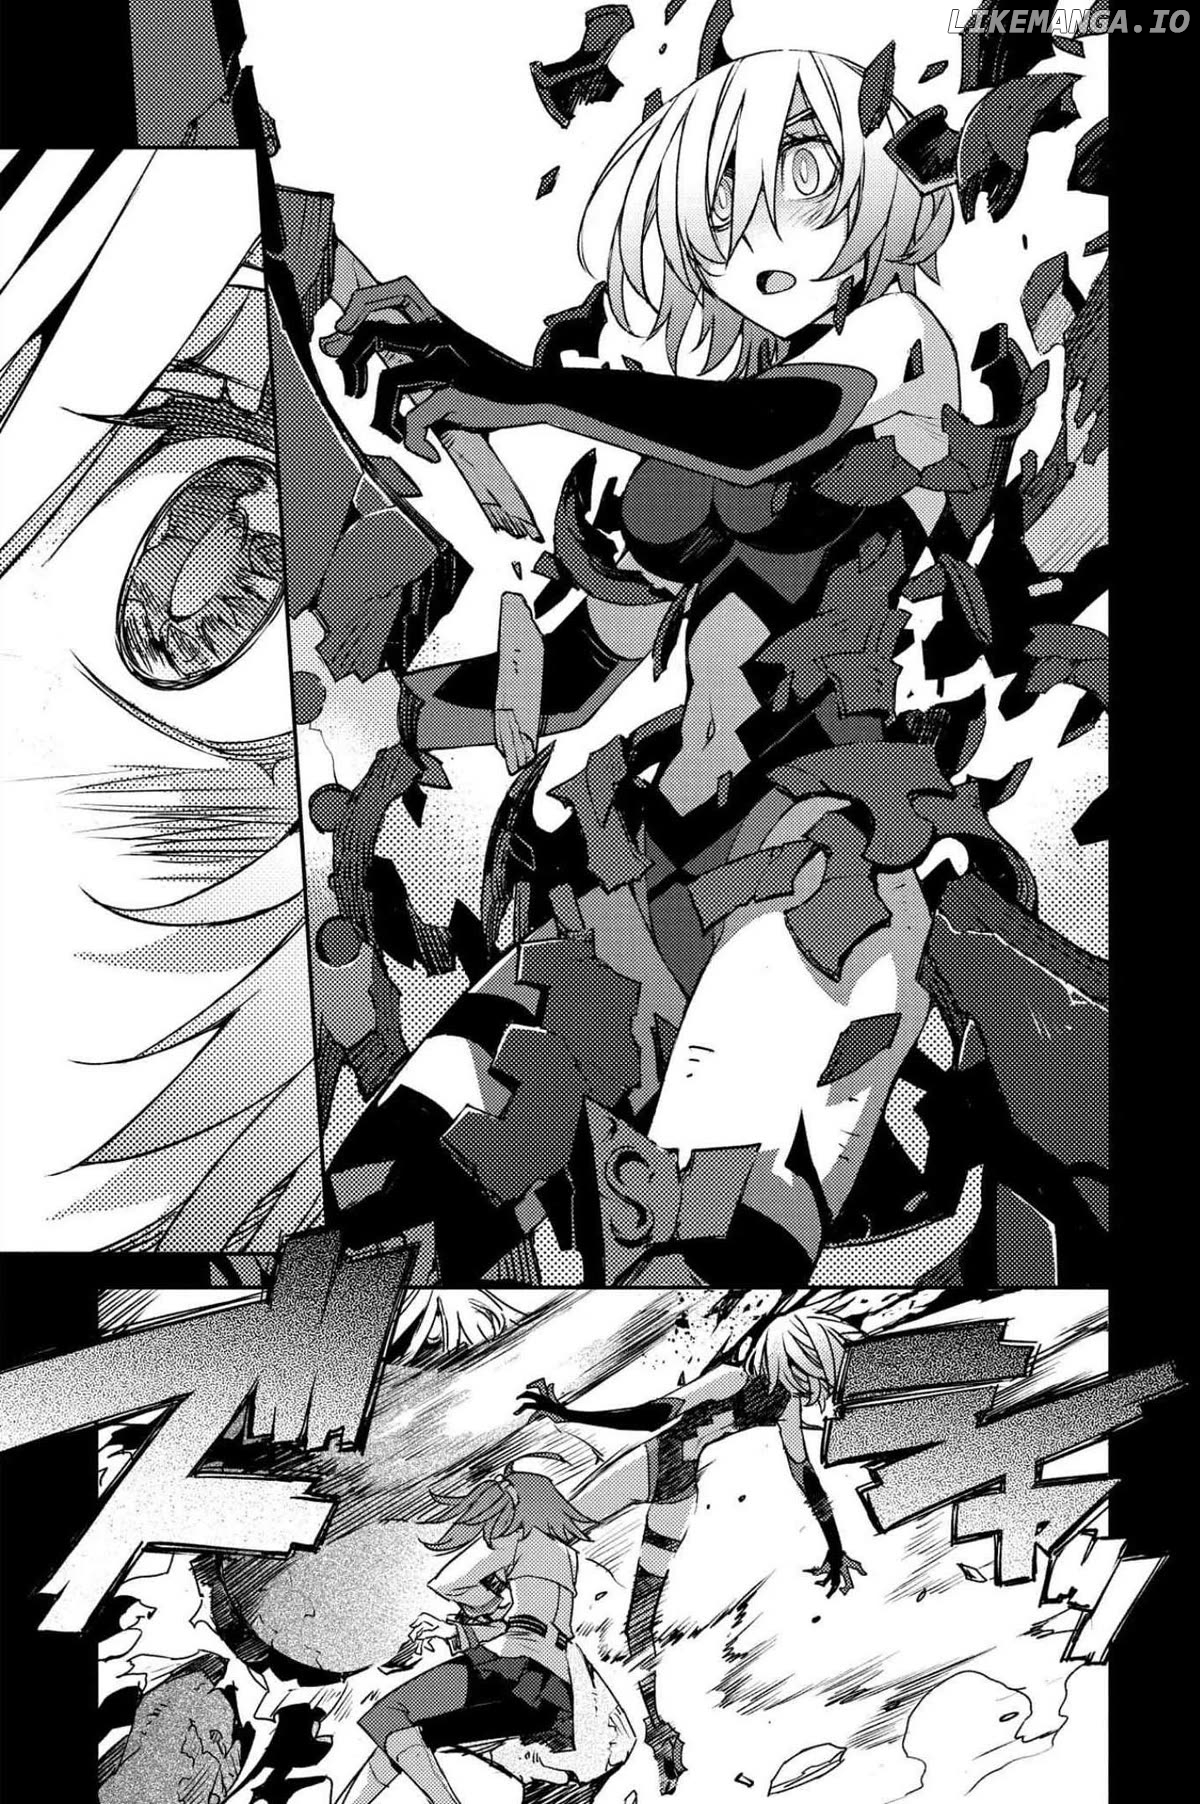 Fate/Grand Order: Epic of Remnant - Subspecies Singularity IV: Taboo Advent Salem: Salem of Heresy Chapter 26 - page 3